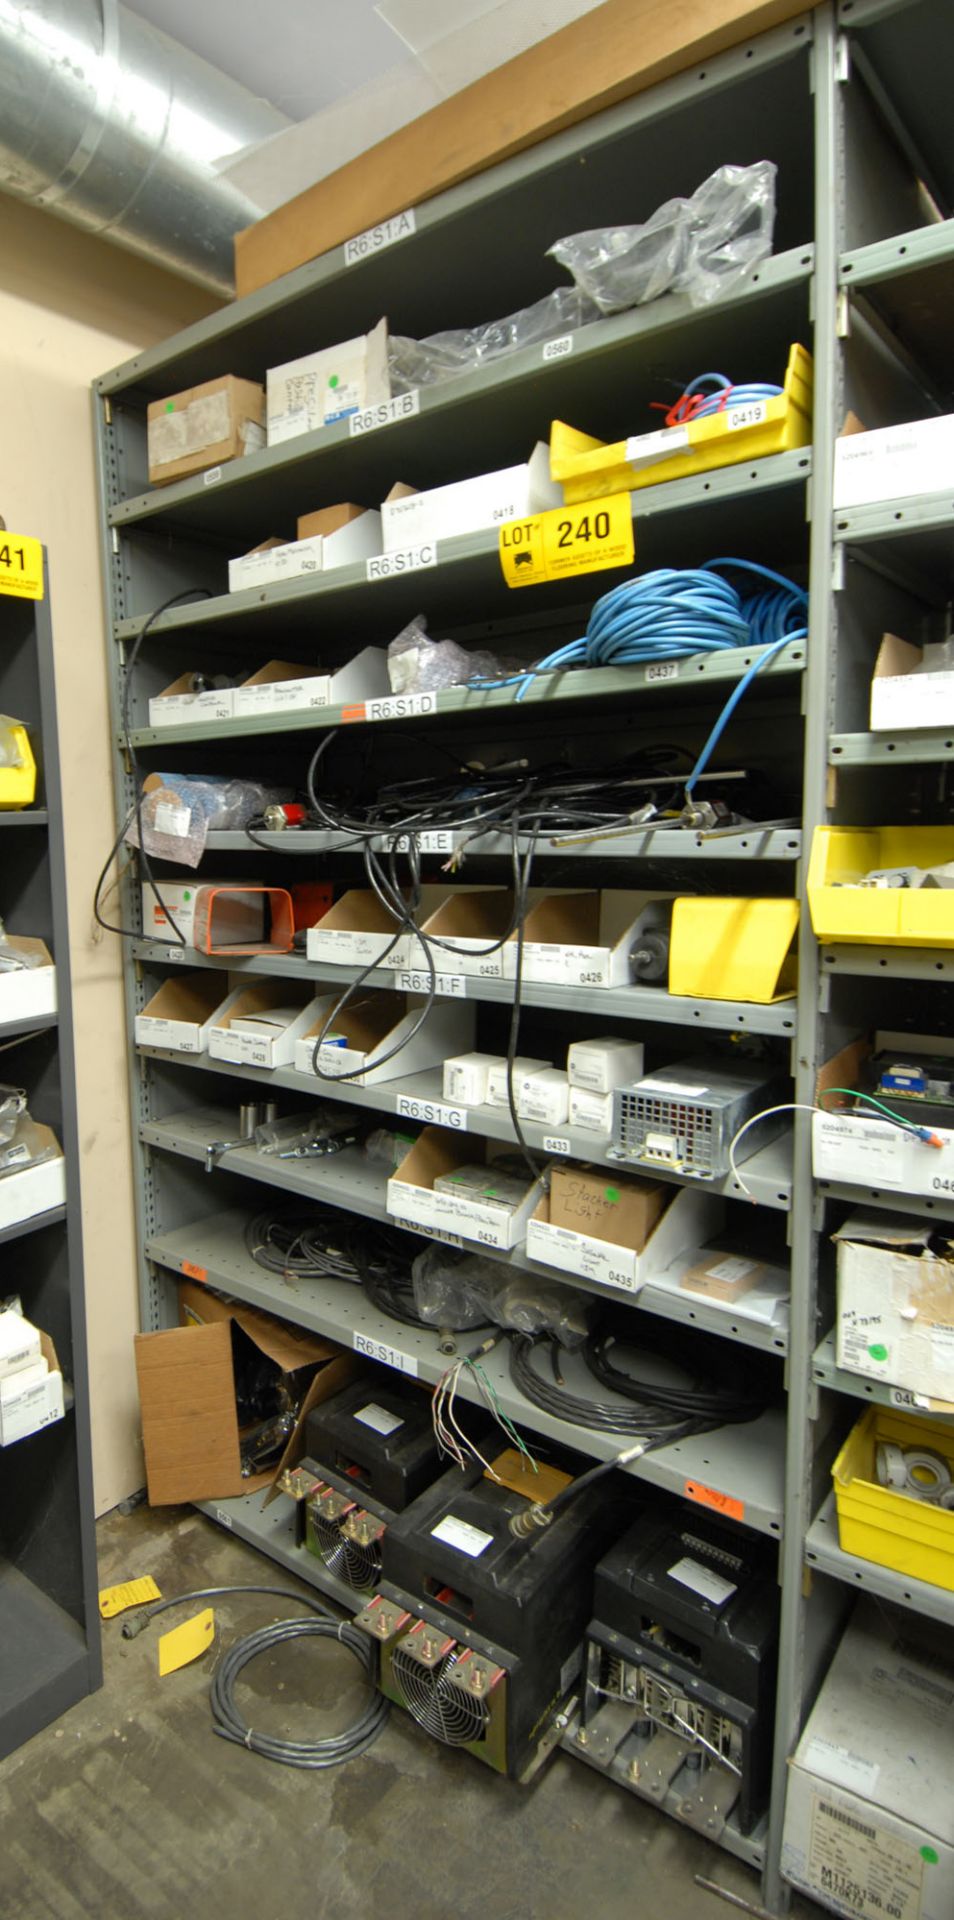 LOT/ CONTENTS OF SHELF (MOTOR CONTROLLERS, SENSORS AND SWITCHES)